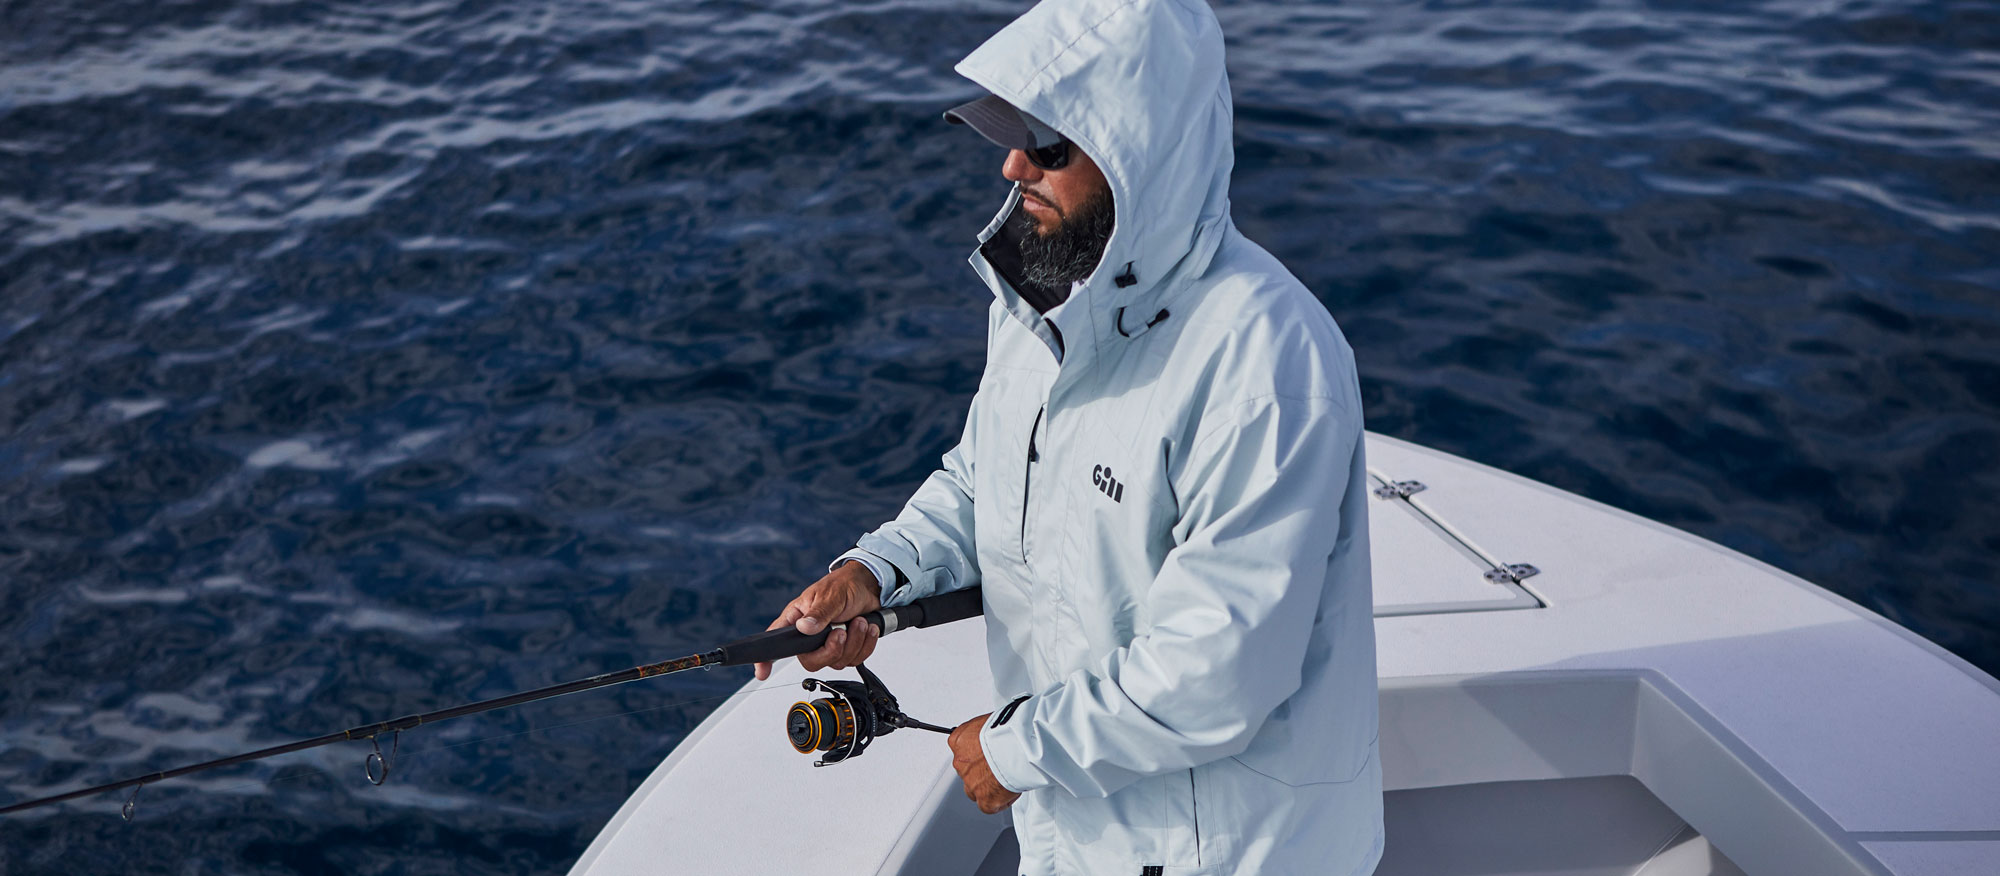 Angler in Aspect Jacket on the water